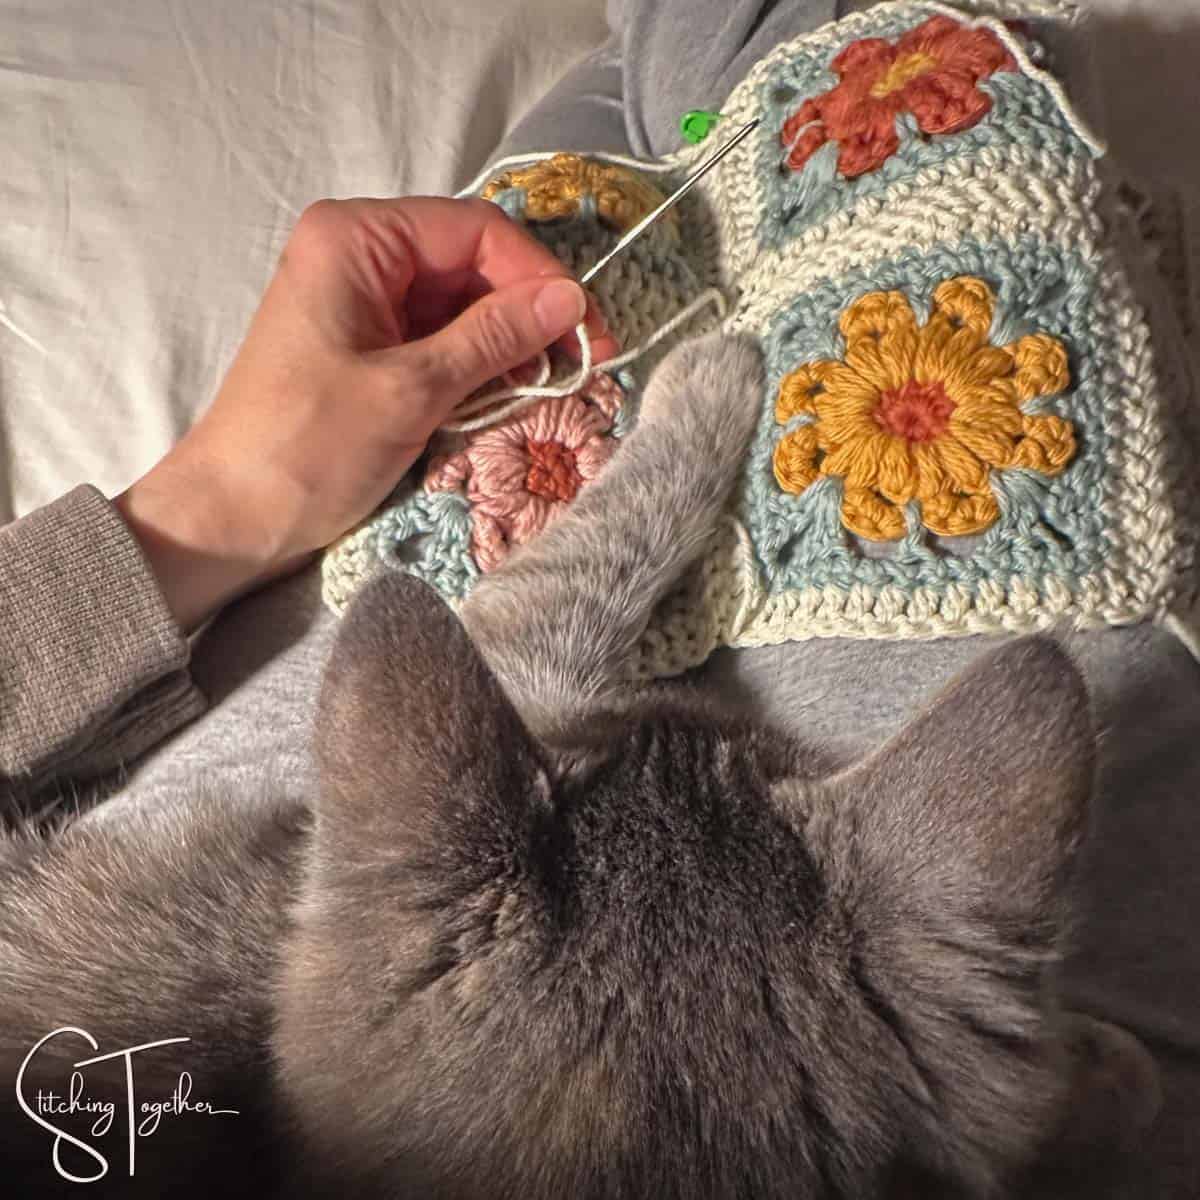 kitten looking at someone's hand while they are crocheting